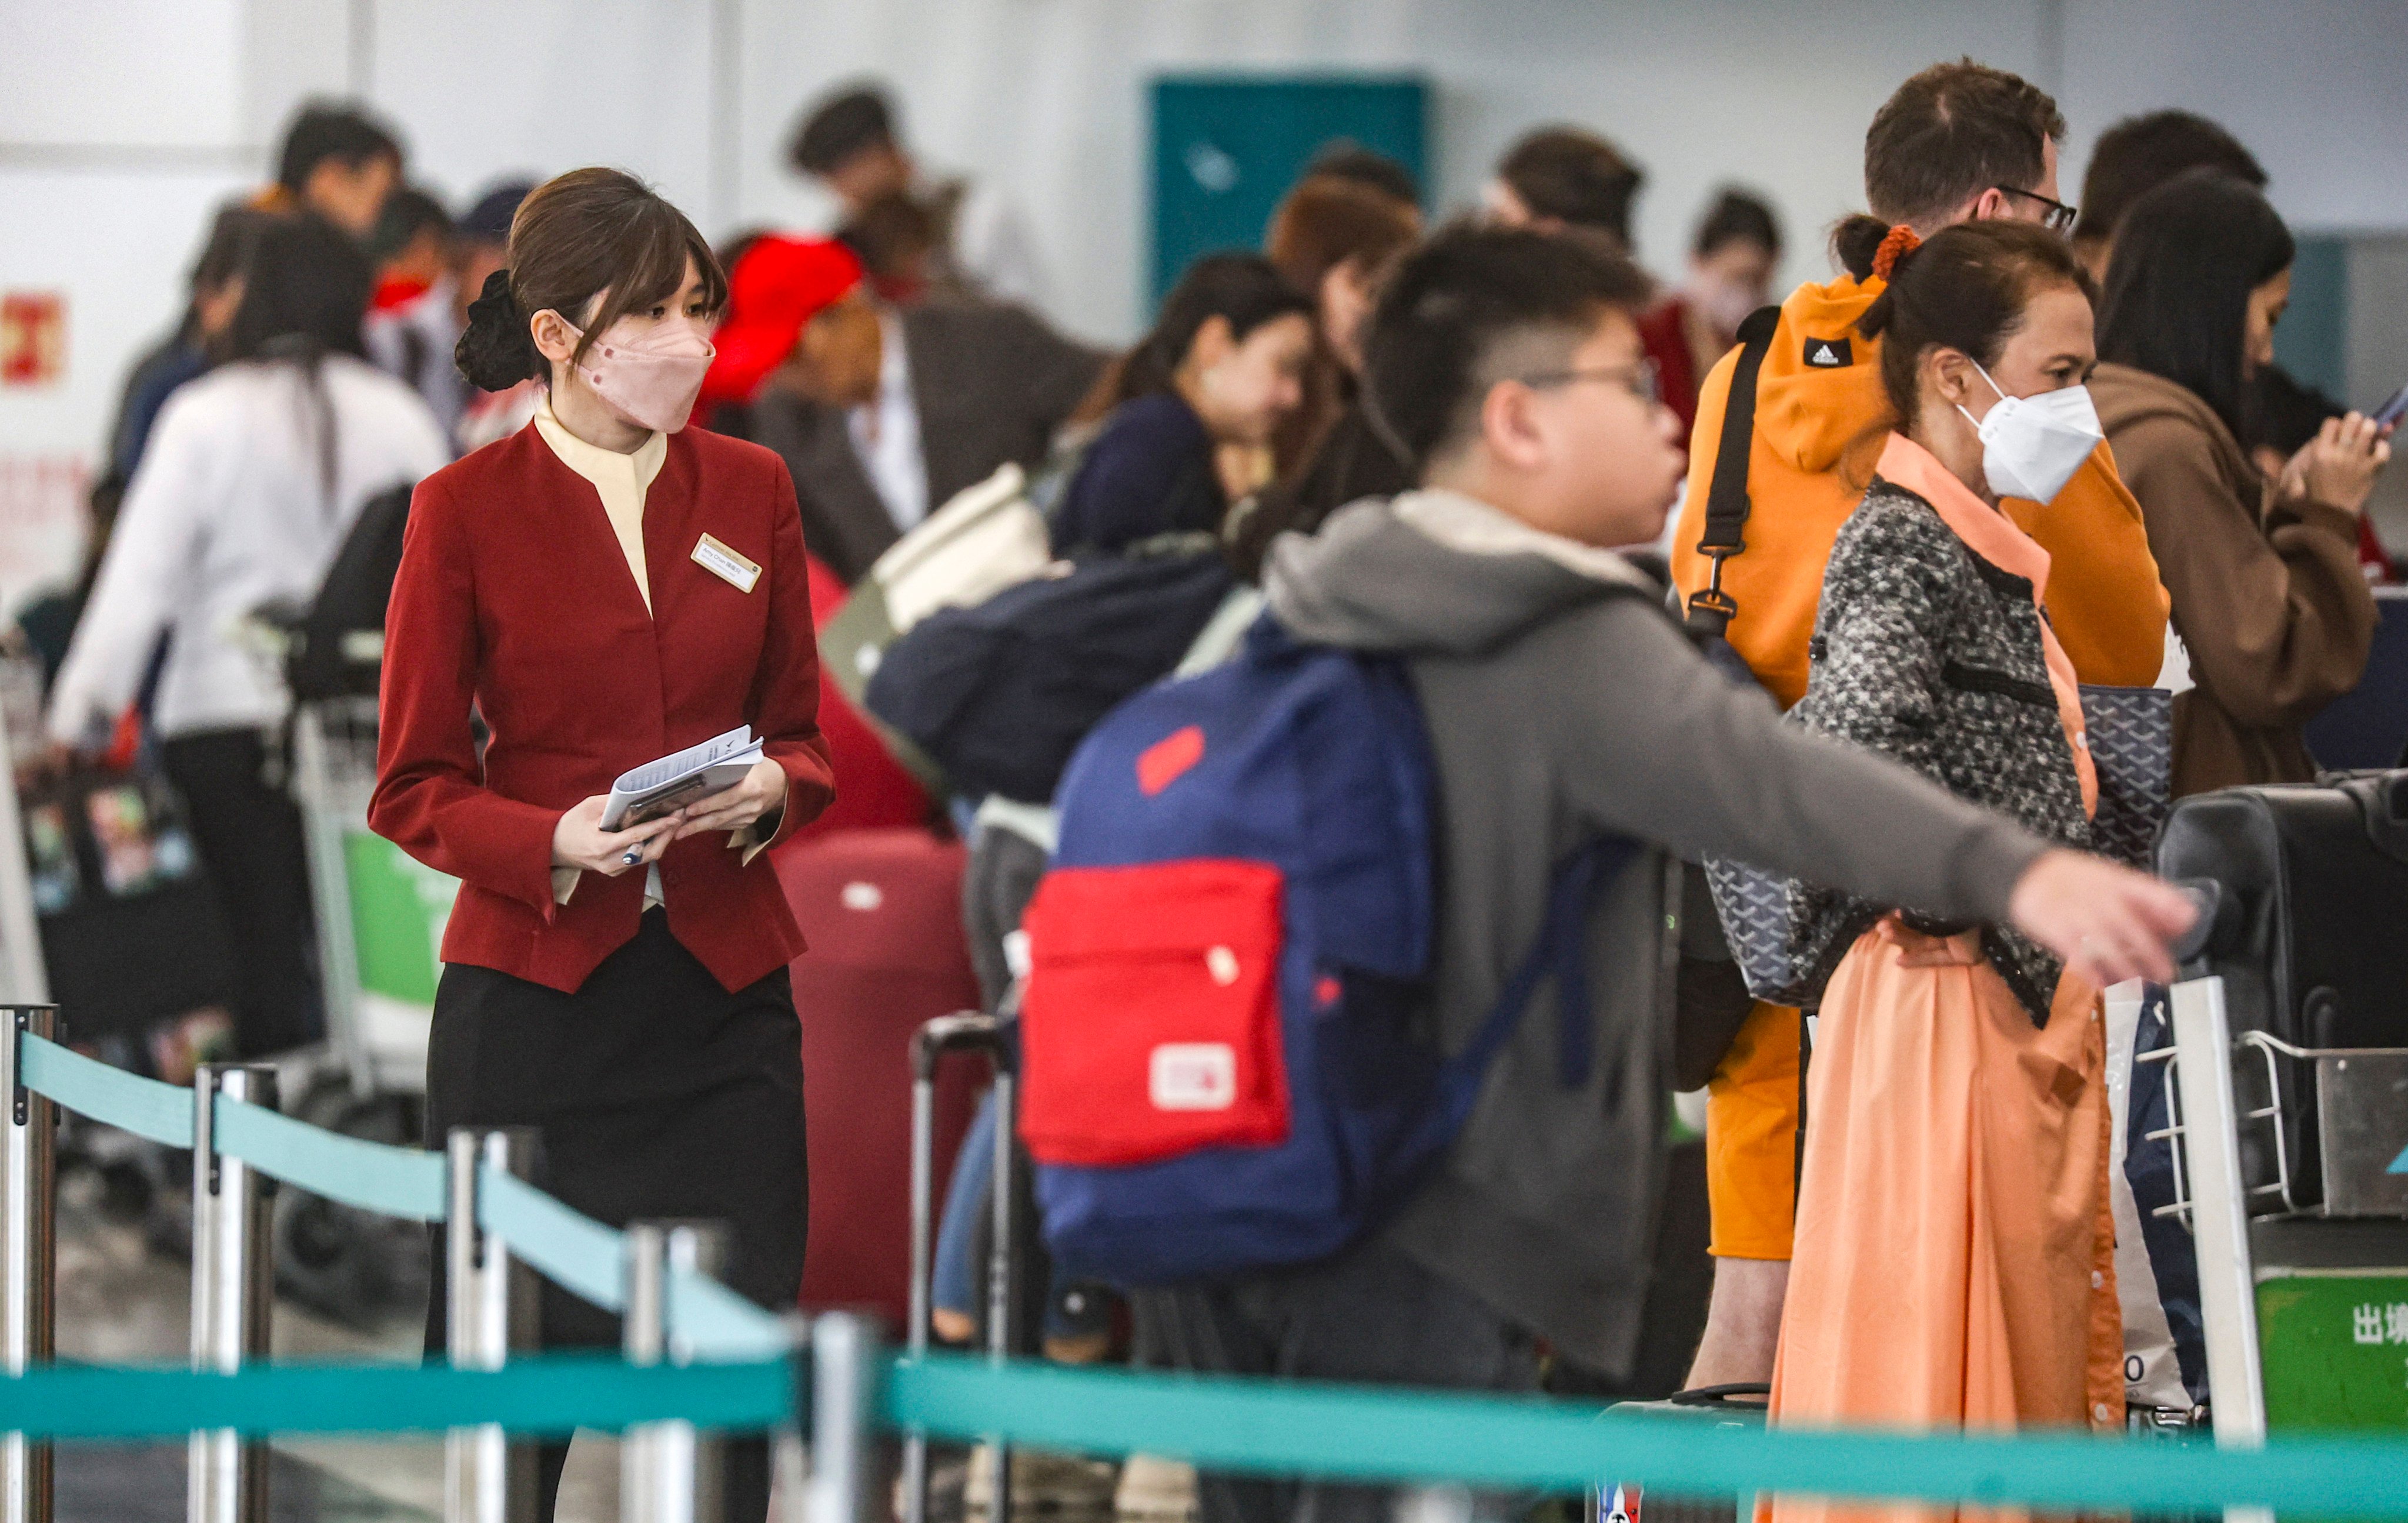 A Cathay spokesman said the new move aimed to ensure a consistent delivery of service after taking into account the views of its customers and operational needs. Photo: Edmond So